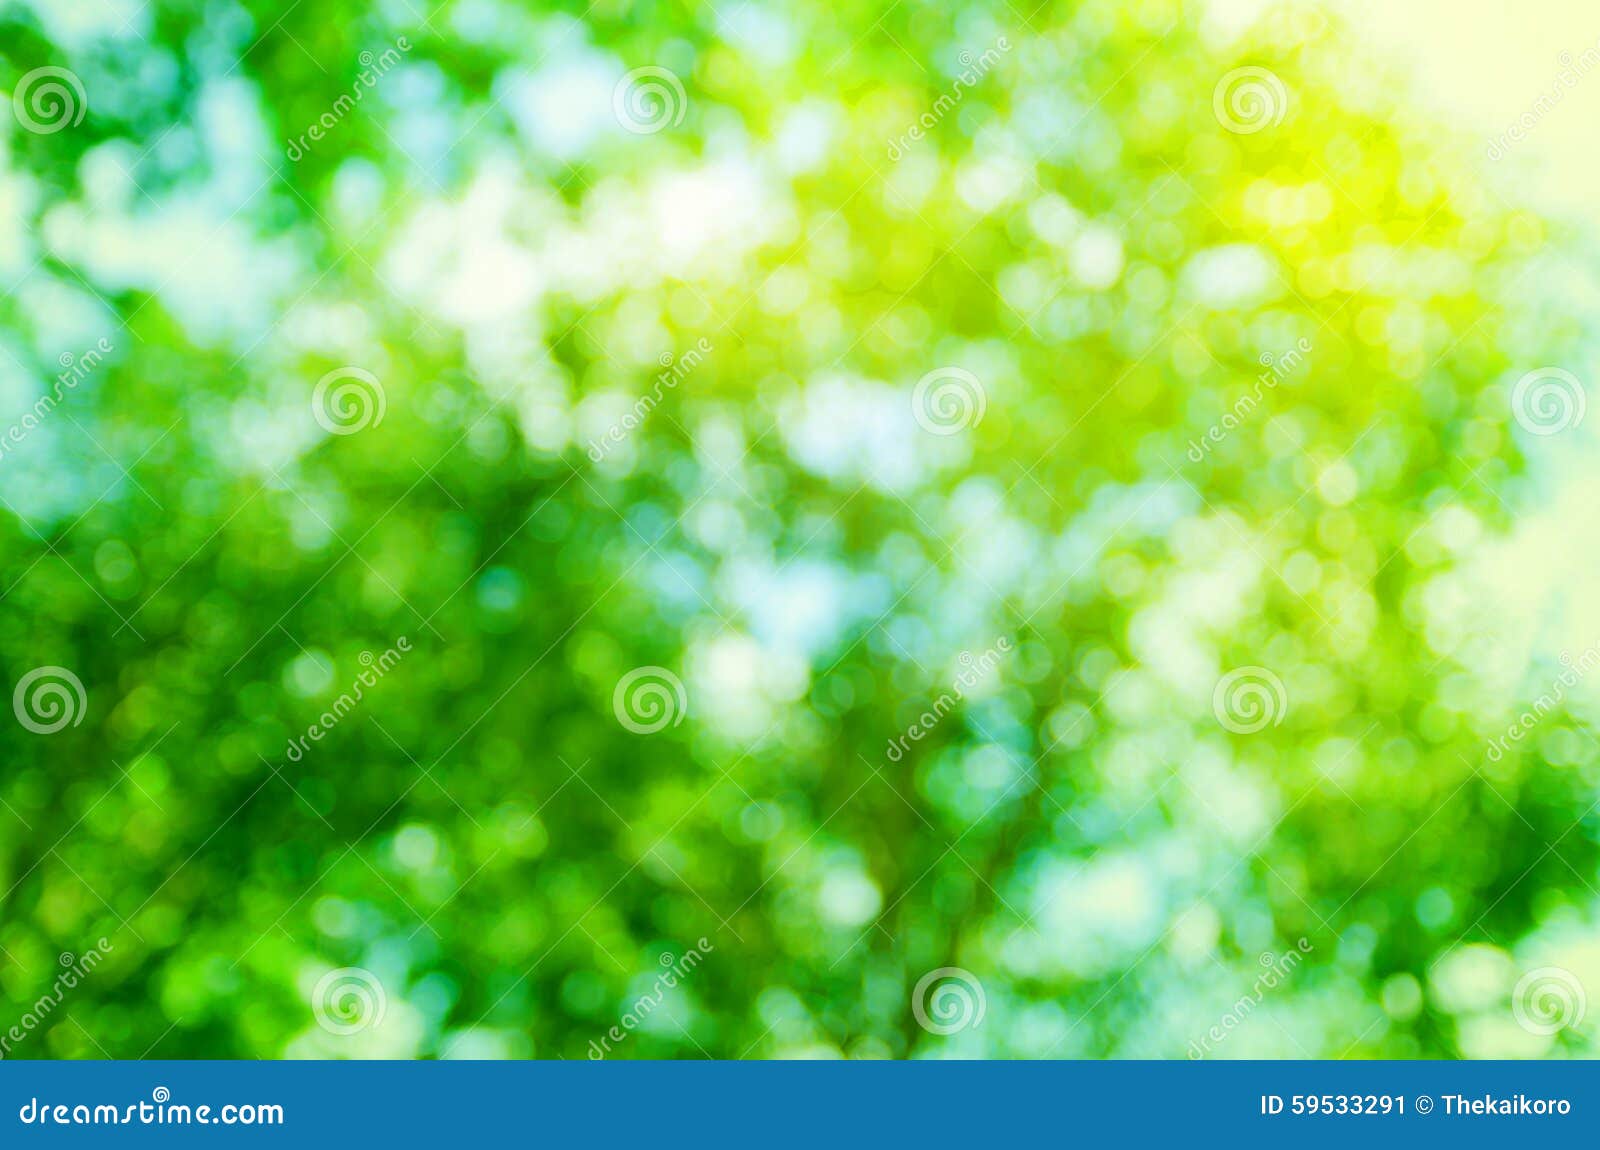 Abstract Background Green Tree Bokeh, Blur Nature Stock Image - Image ...